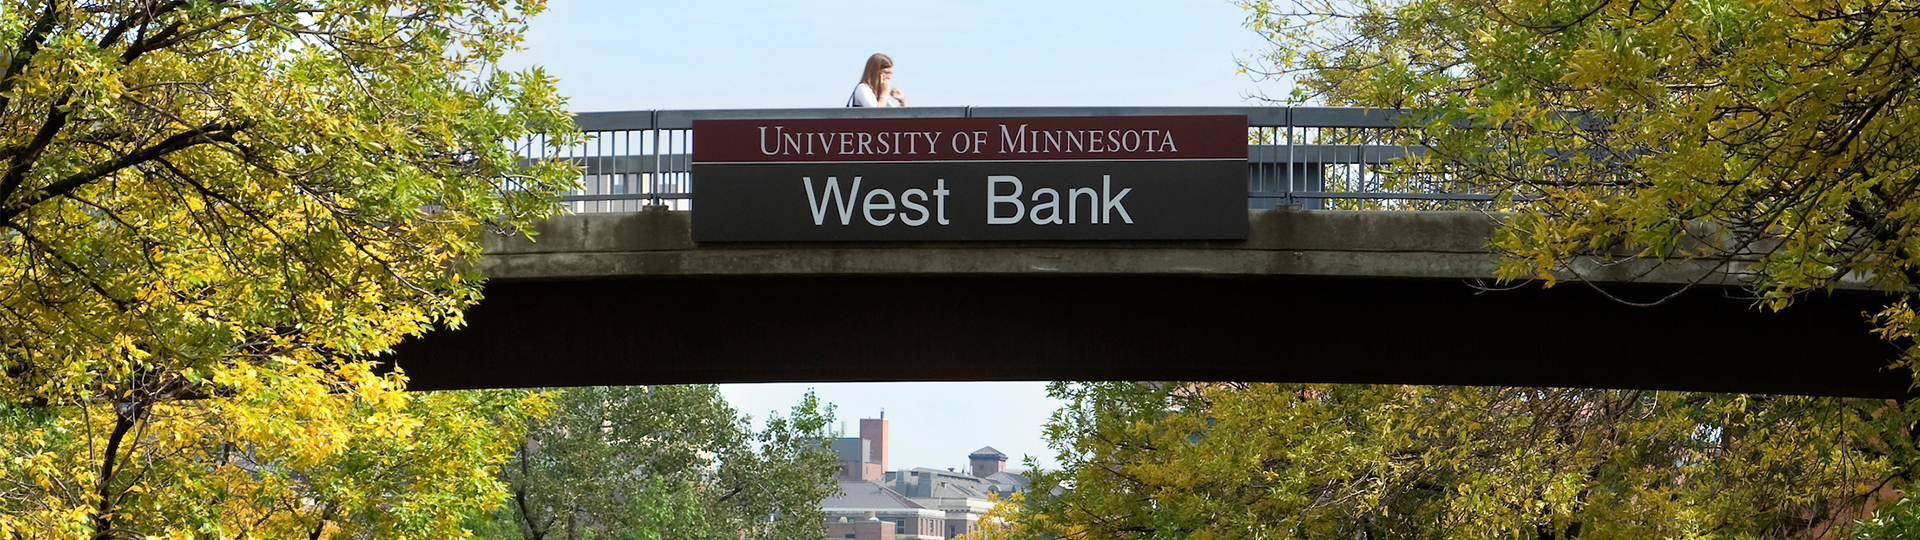 A student walks across a footpath with a sign that reads "University of Minnesota West Bank"